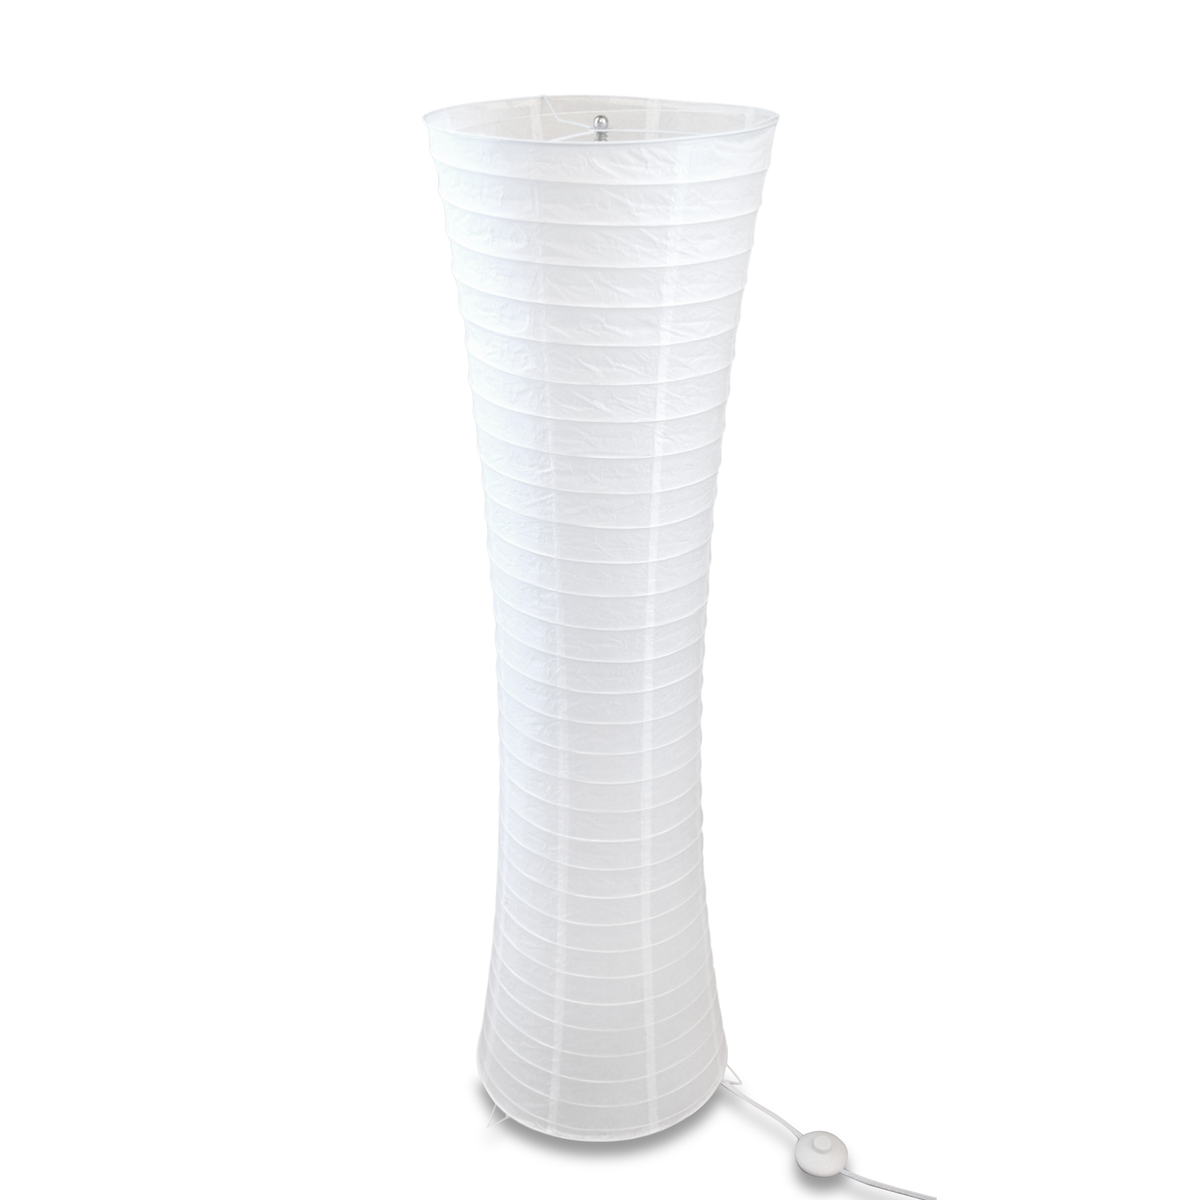 Cylinder Paper Floor Lamp with Foot Switch, 4-FT Tall, 14-inch x 48-inch